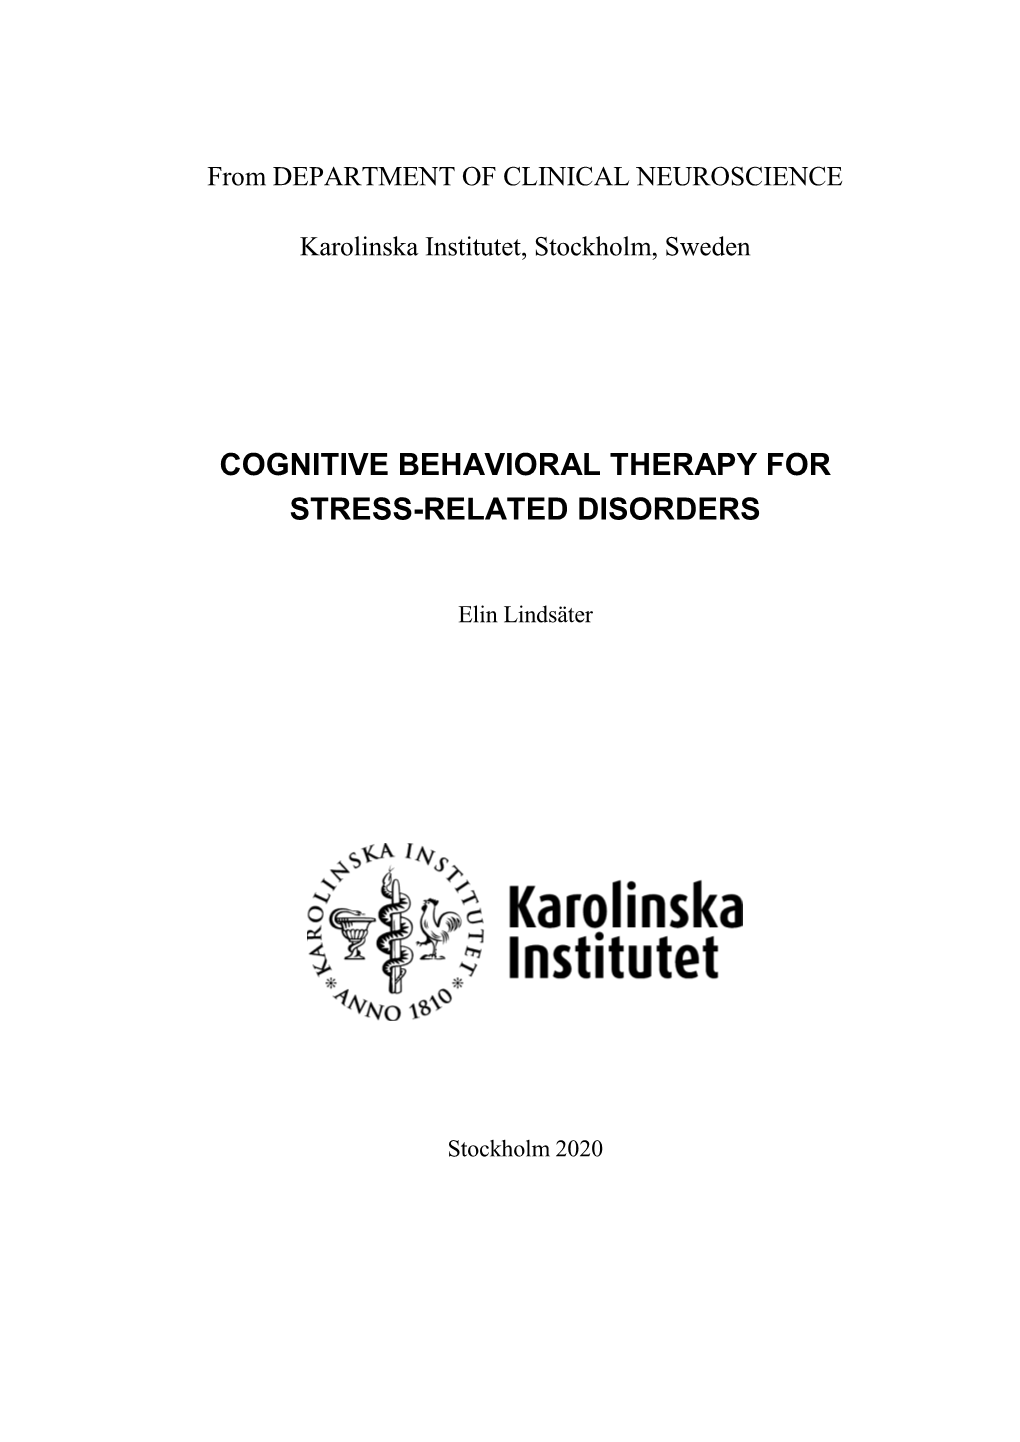 Cognitive Behavioral Therapy for Stress-Related Disorders